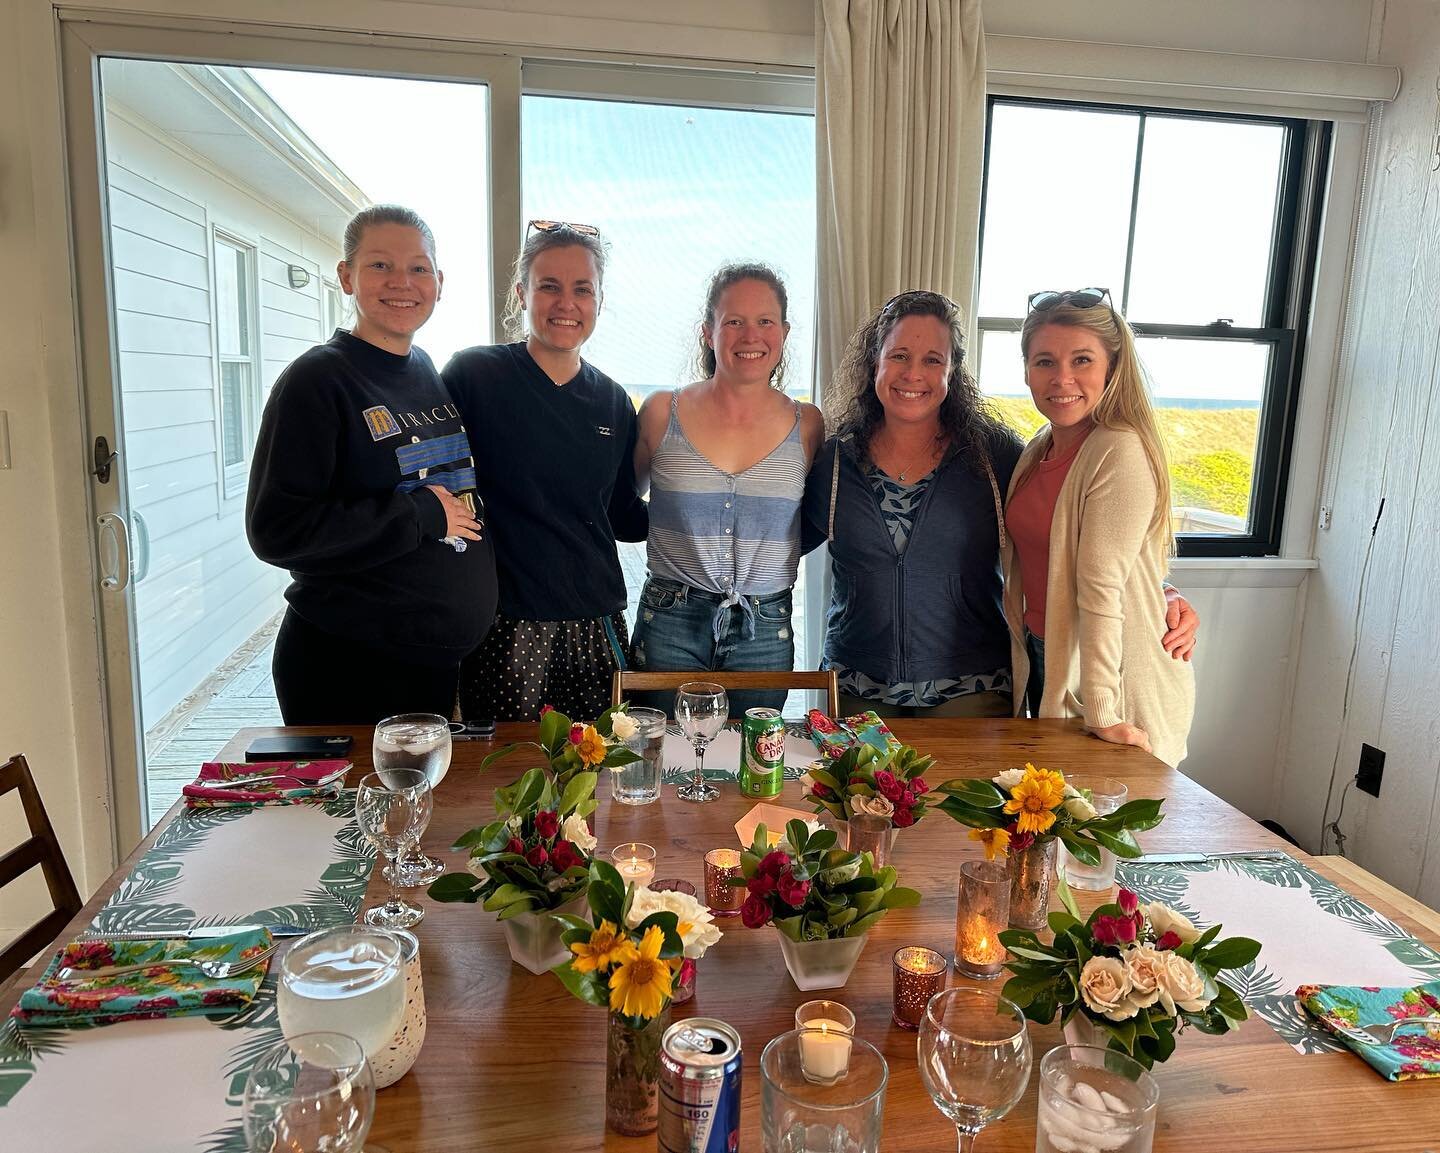 Grateful for these lovely ladies 💙💙 we spent a couple of days down south soaking up the sun, eating great food by @outerbankspersonalchef, and getting much needed rest after recital. 
&bull;&bull;&bull; 

#islandschoolofdance #isod #isoddancers #is